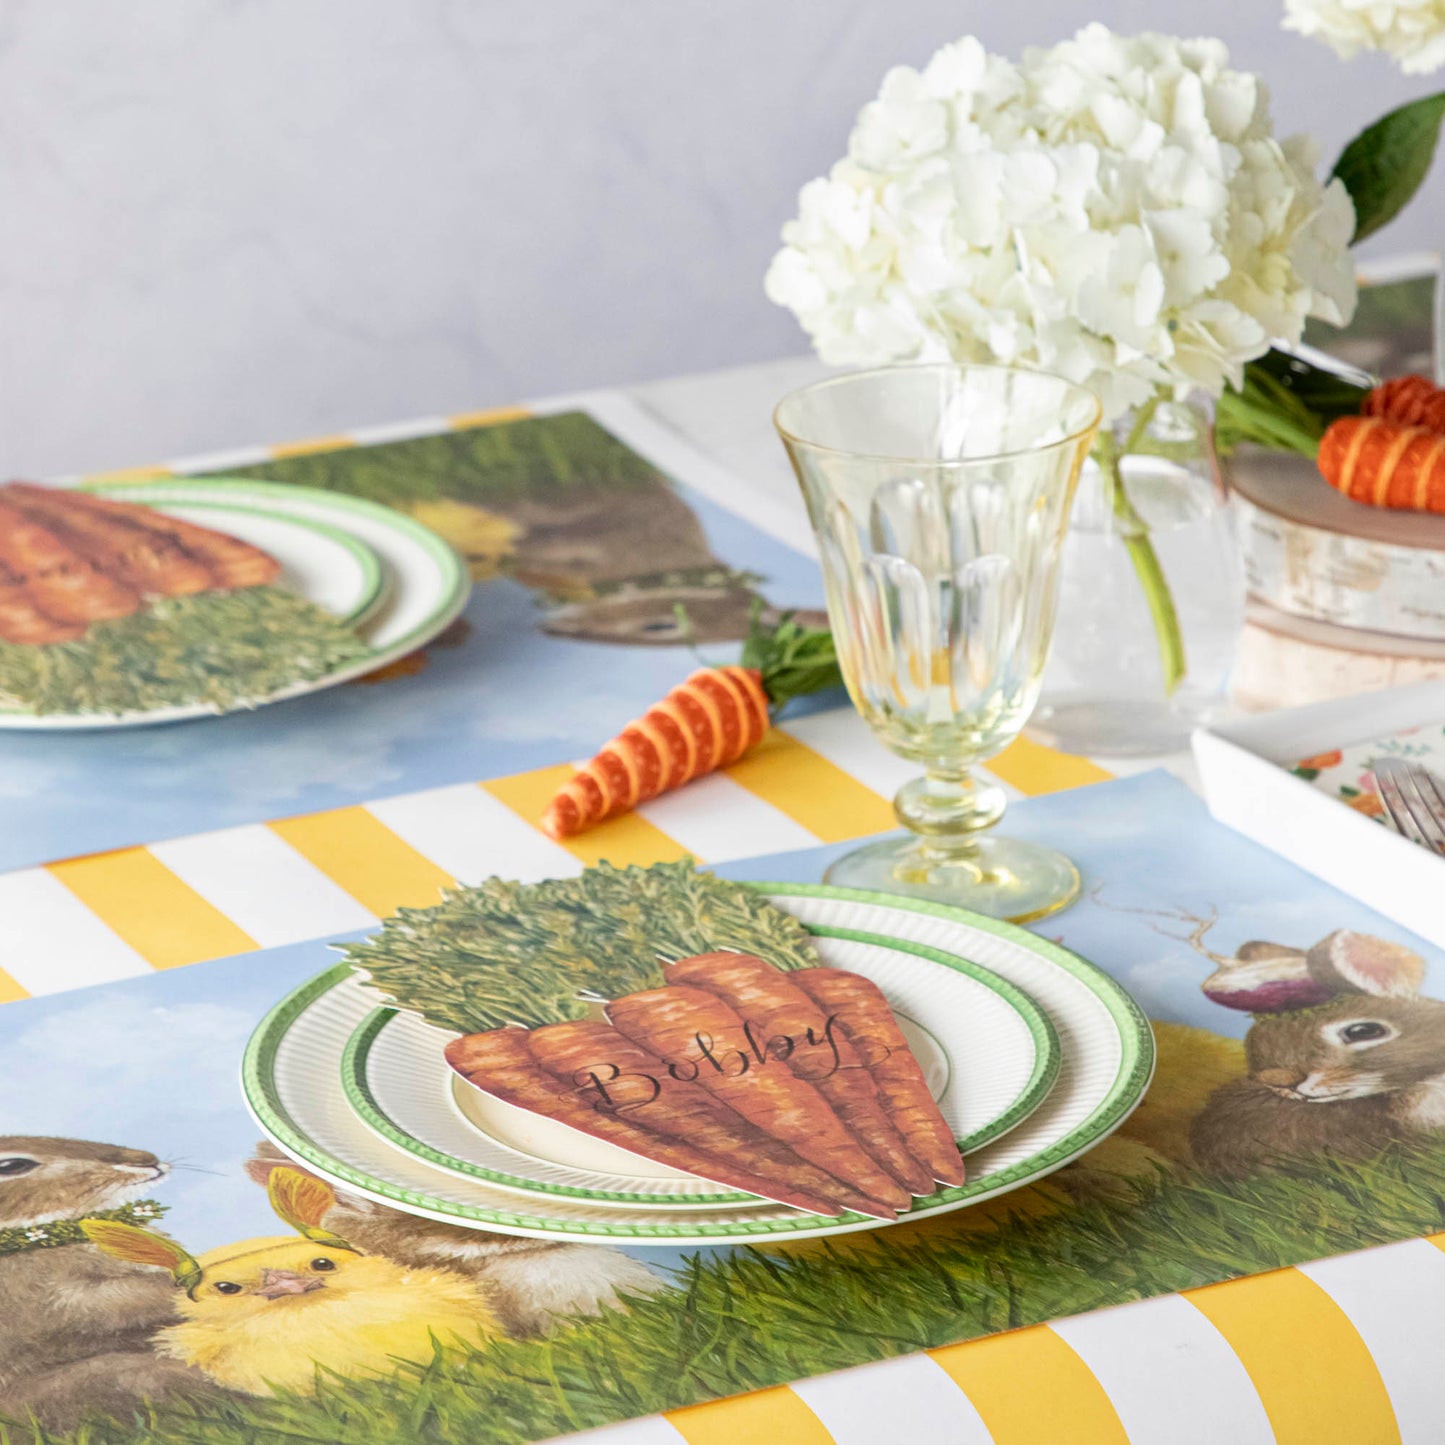 Carrots Table Accent